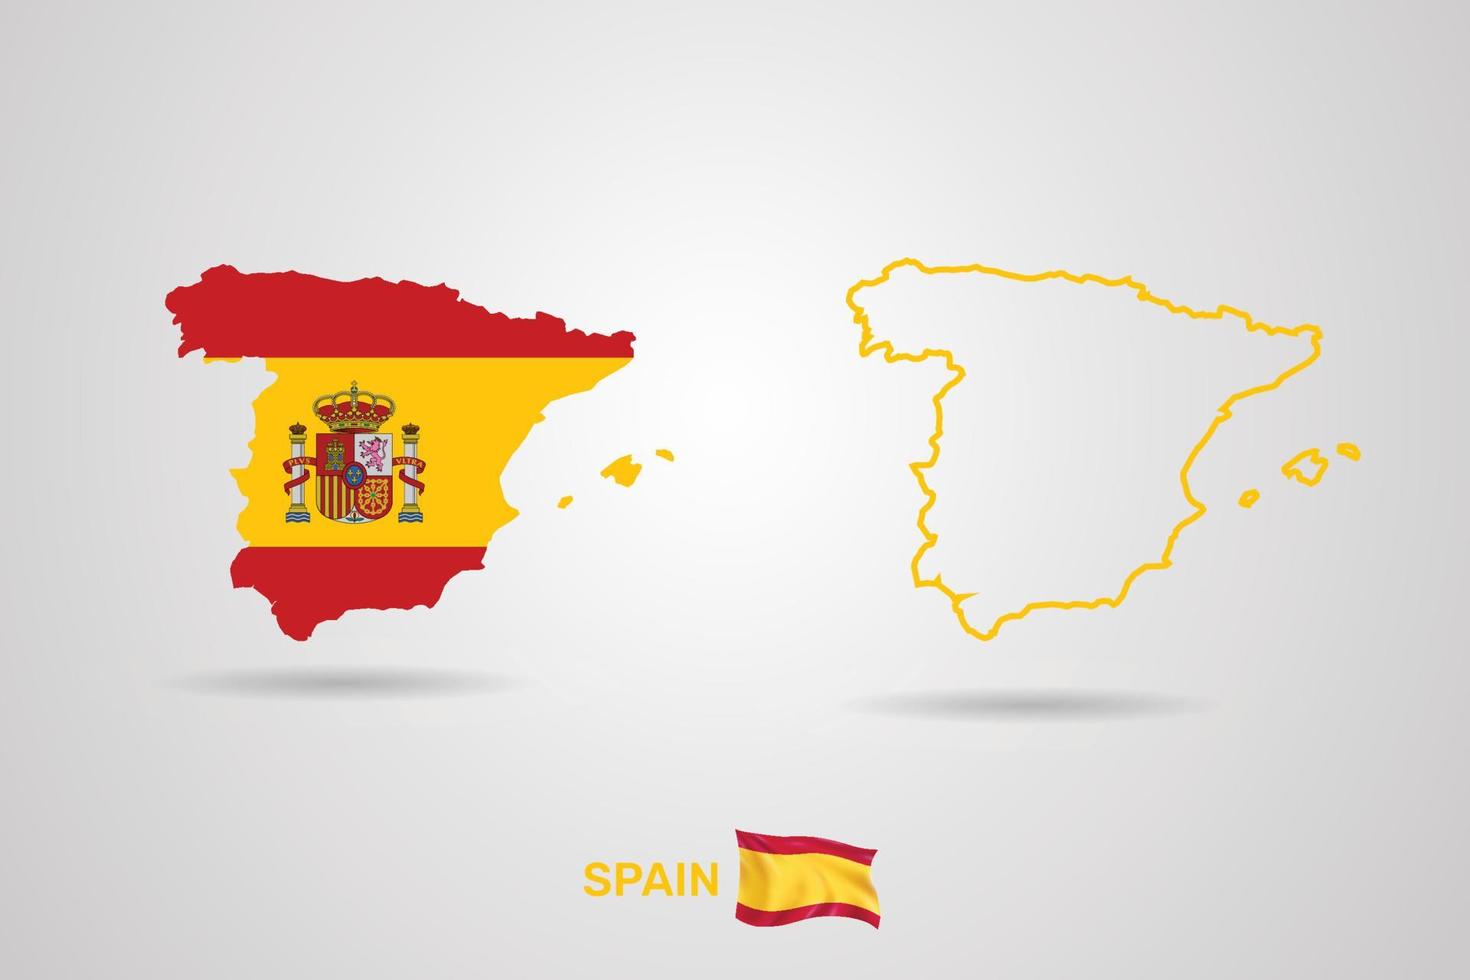 Spain Republic Map With Flag, Vector Illustration.